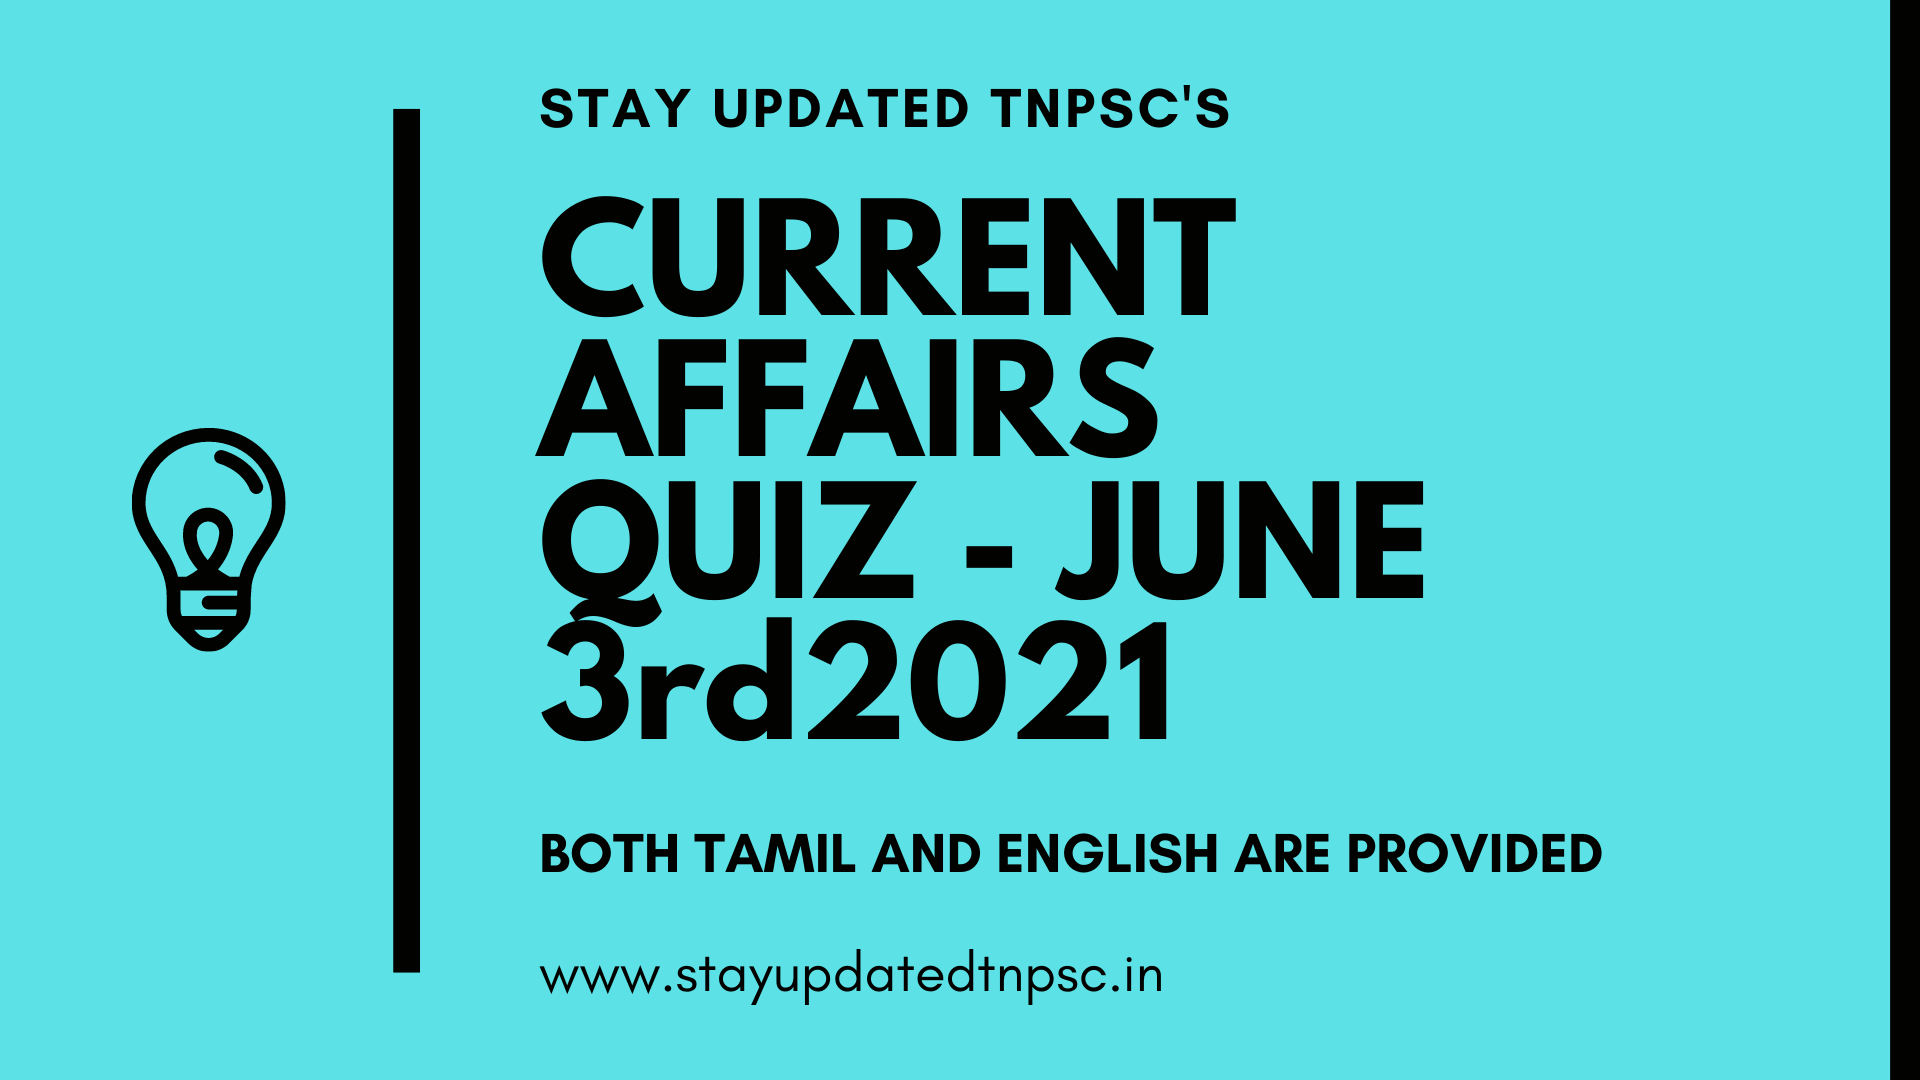 TNPSC DAILY CURRENT AFFAIRS: 03 JUNE 2021